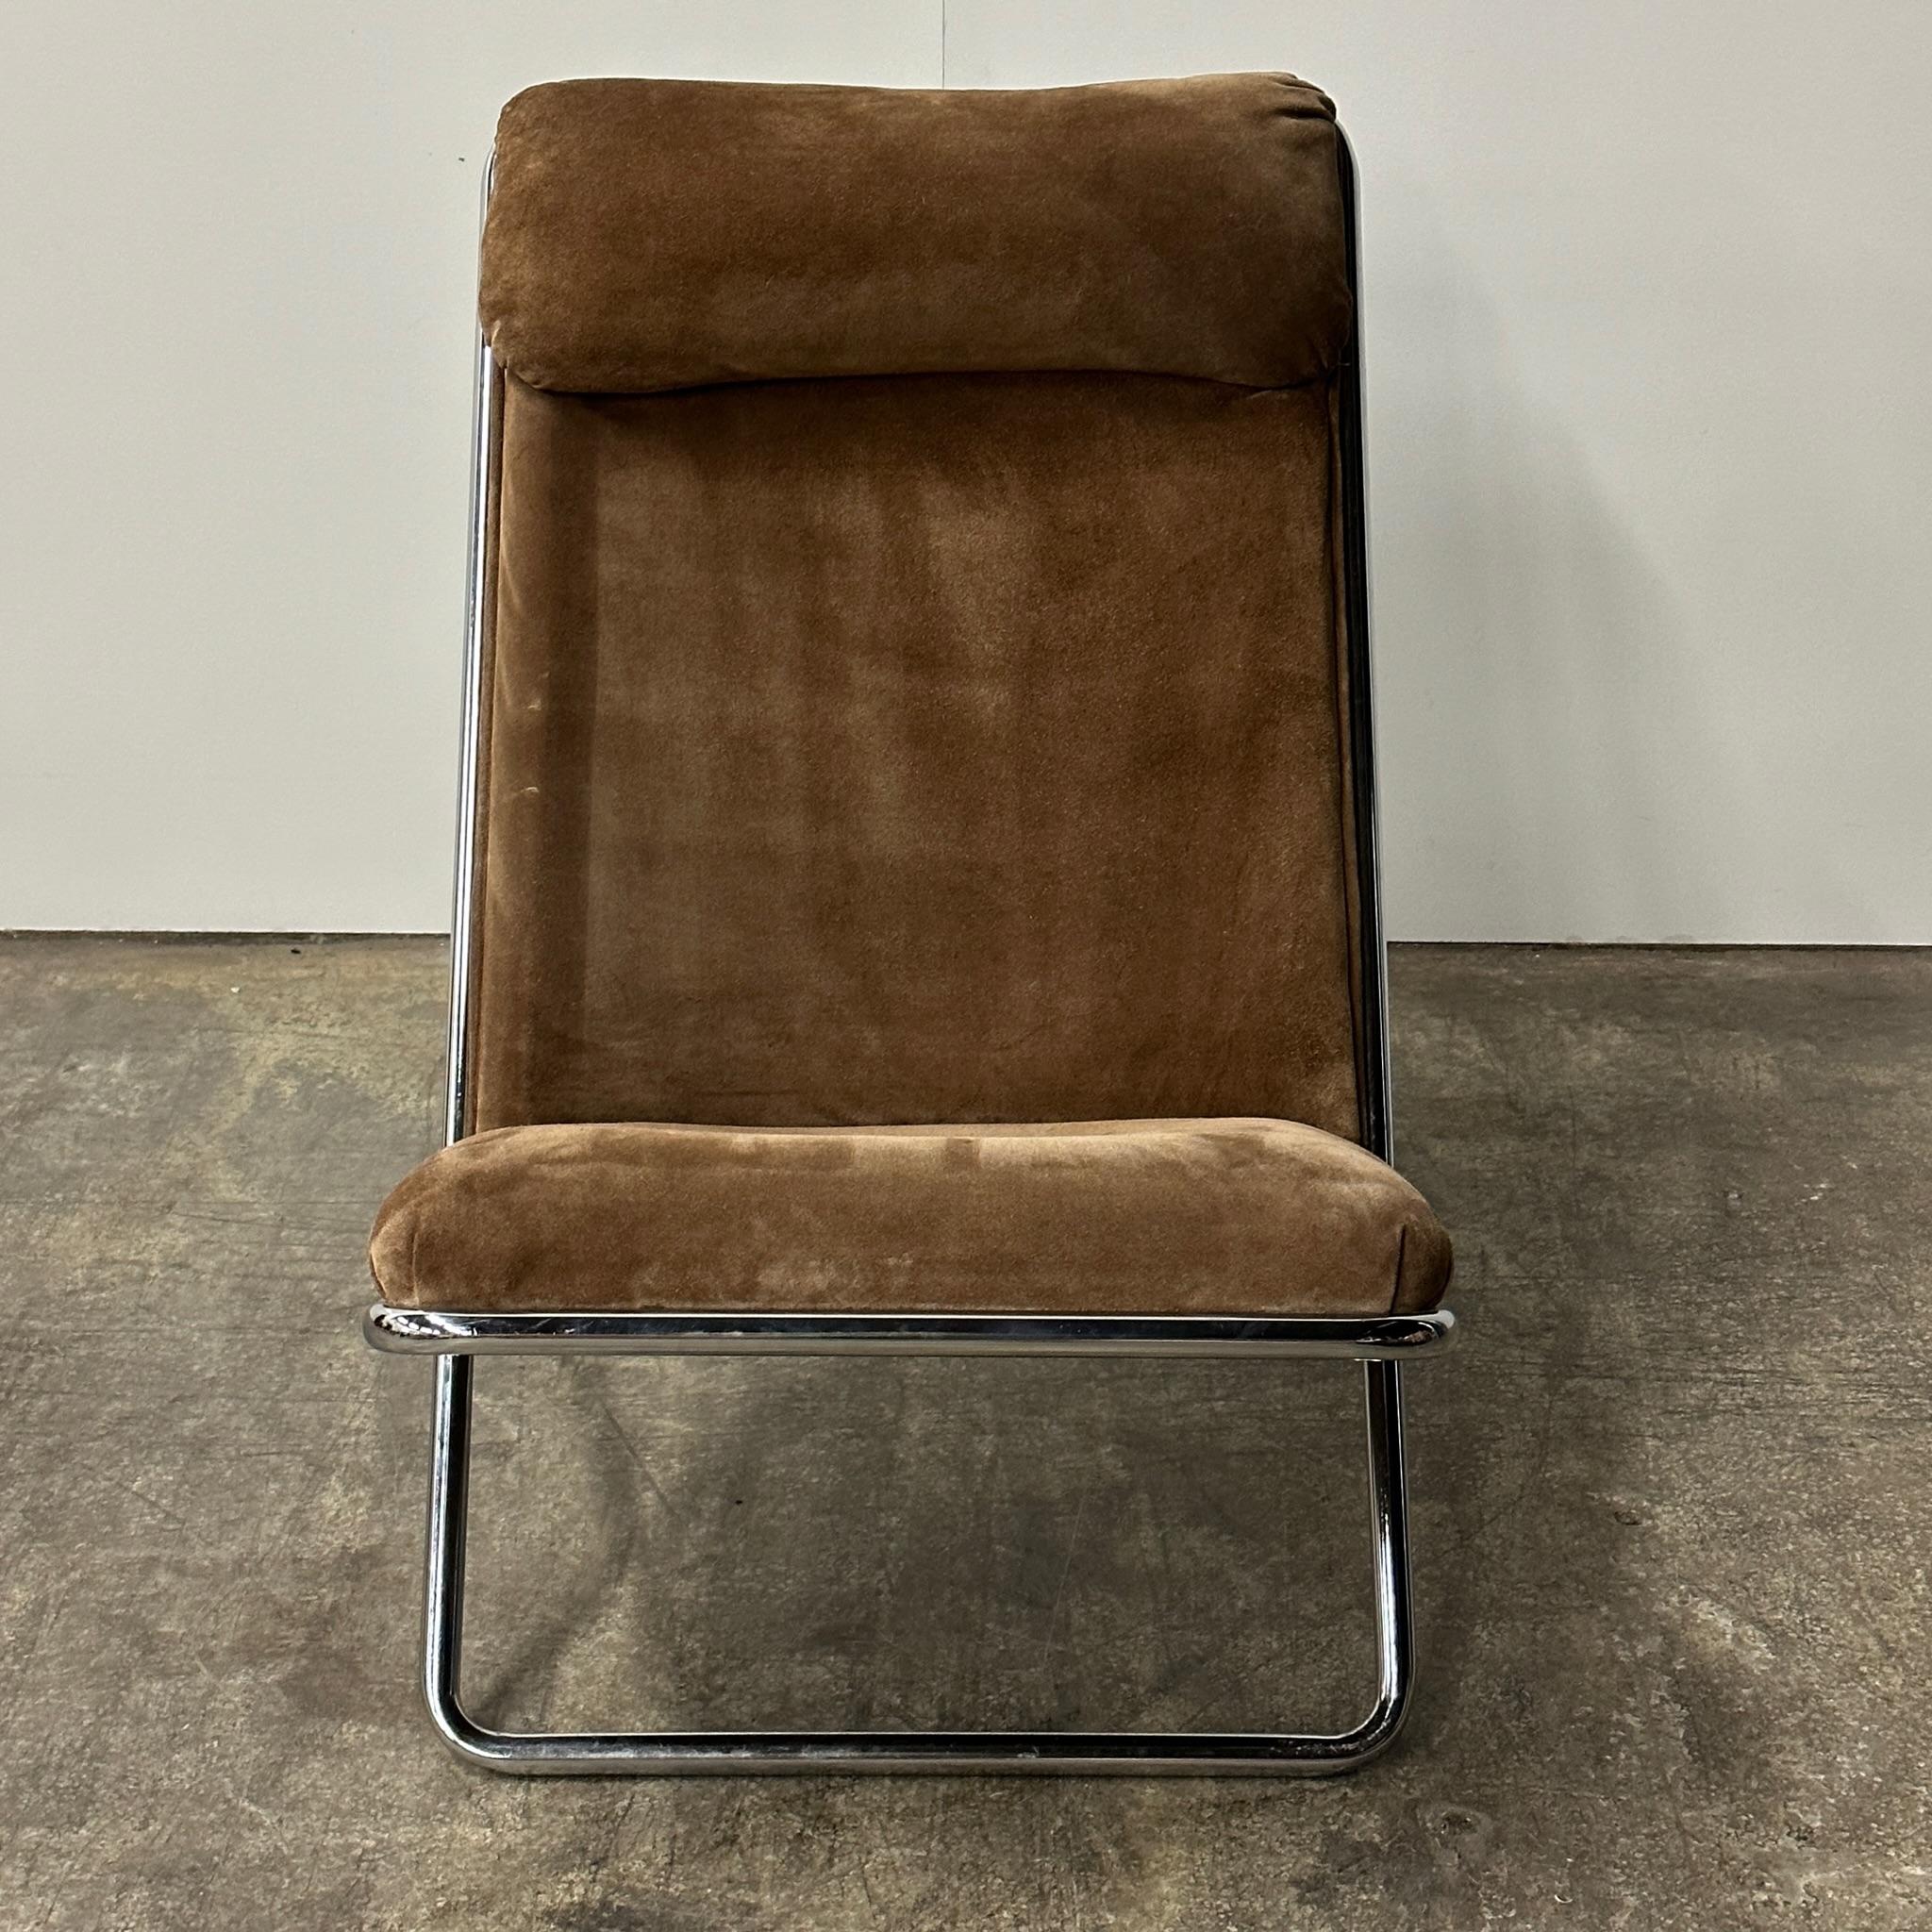 Upholstered in original brown suede. A rare piece to find in the original upholstery.